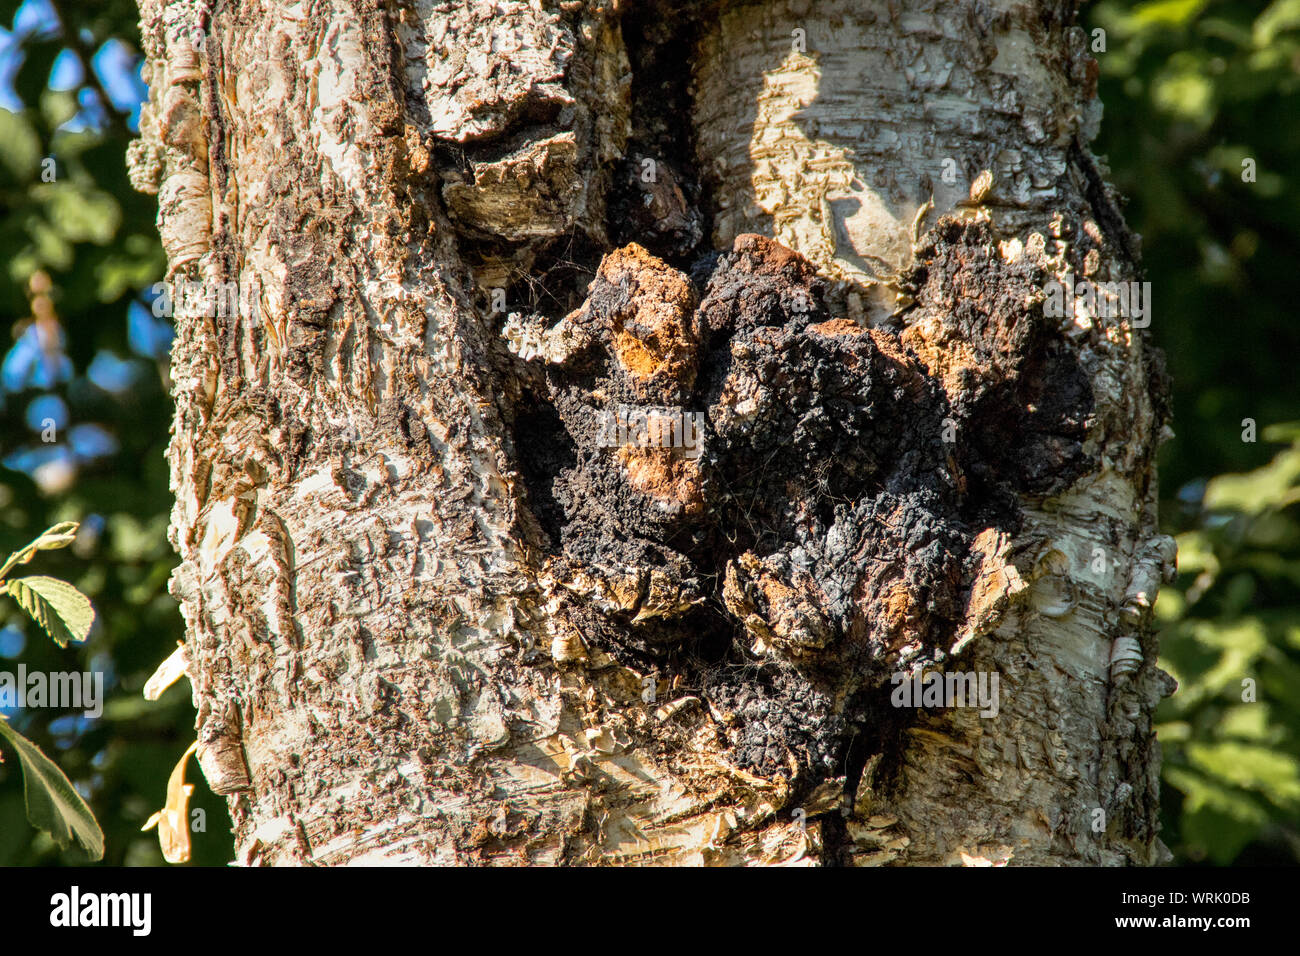 Chaga mushroom also known as Inonotus obliquus growing out of an birch tree trunk in summer. Chaga is used for natural herbal remedy. Stock Photo